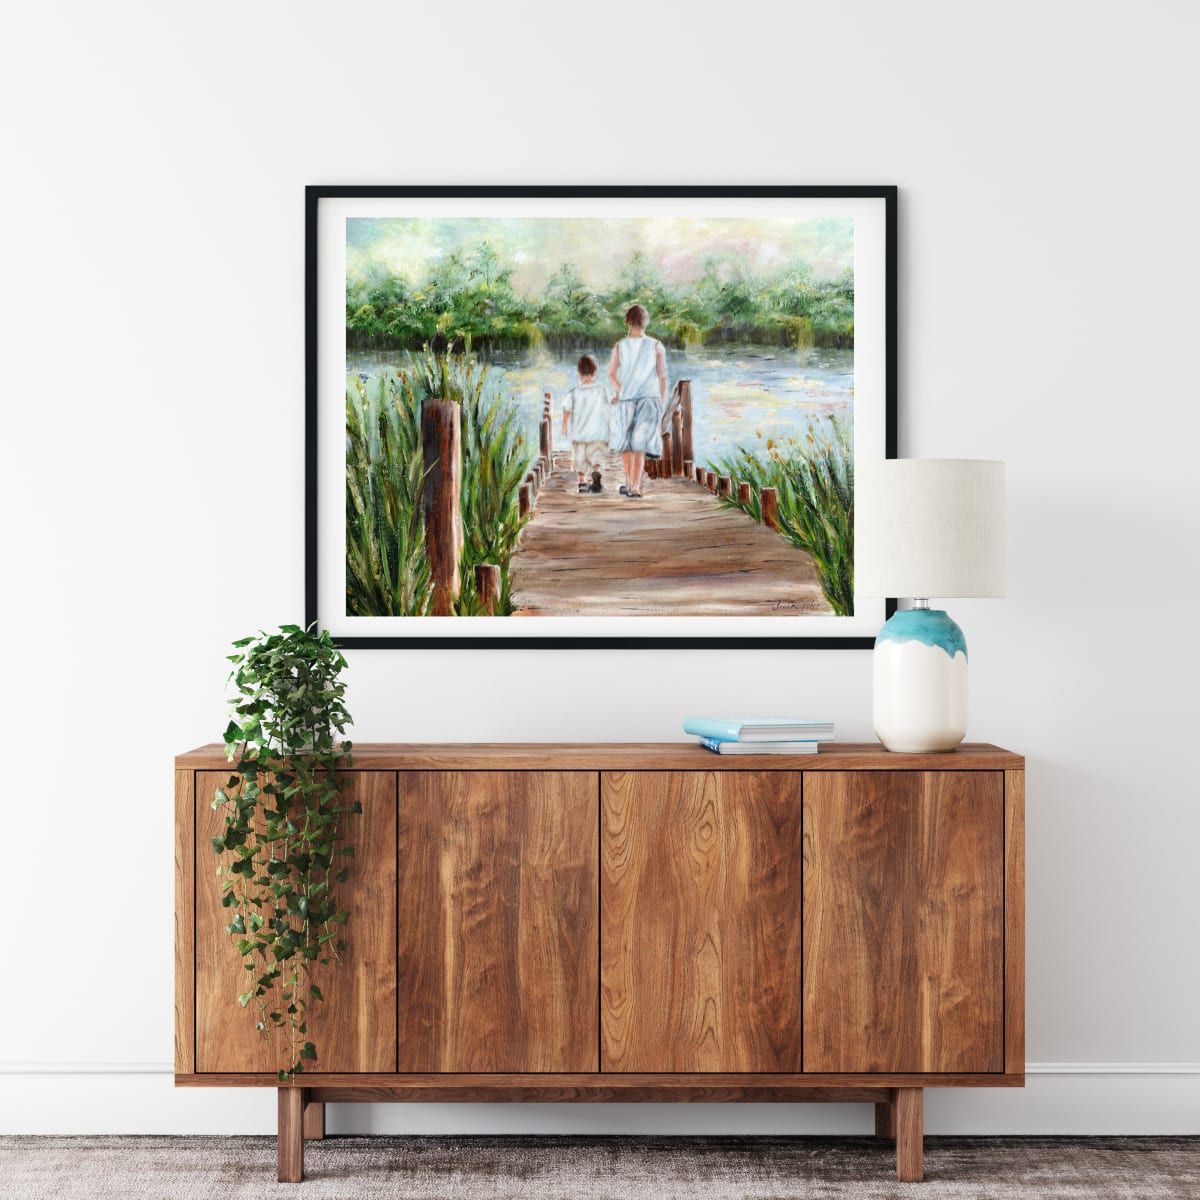 Brothers on the River Dock #1 by Jenn Royster  Image: Brothers on the River Dock framed on wall